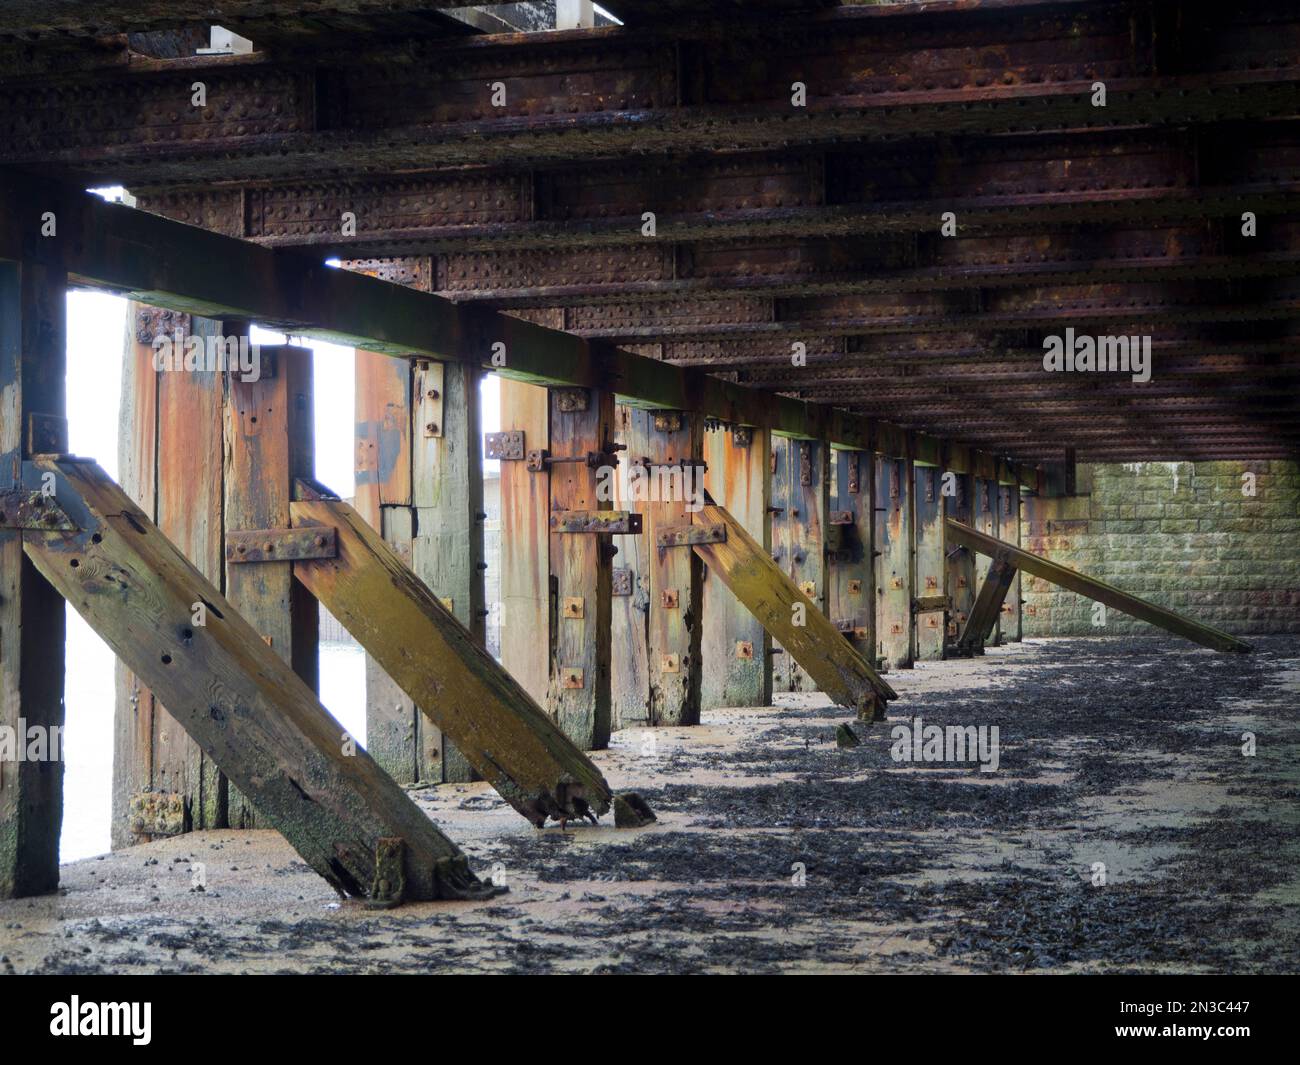 View of wooden support structure under the pier at Folkestone Harbour Arm; Folkestone, Kent, England, United Kingdom Stock Photo